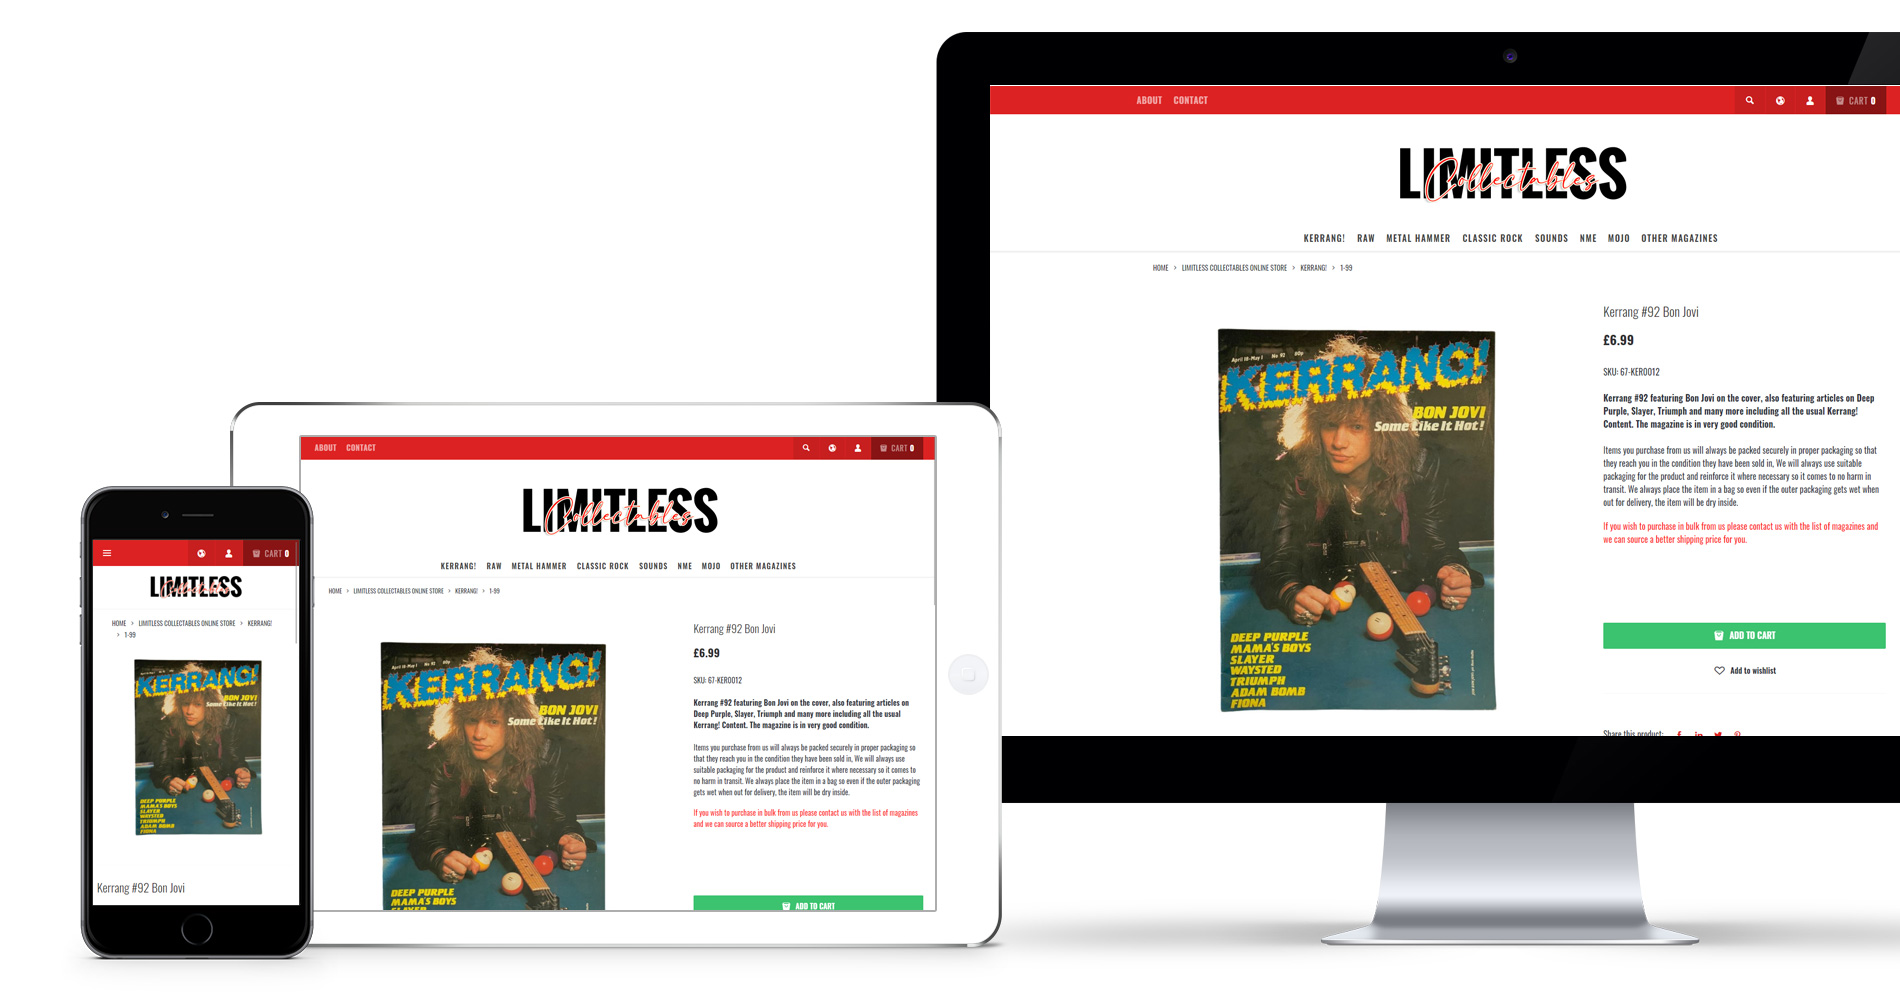 Limitless Collectables devices